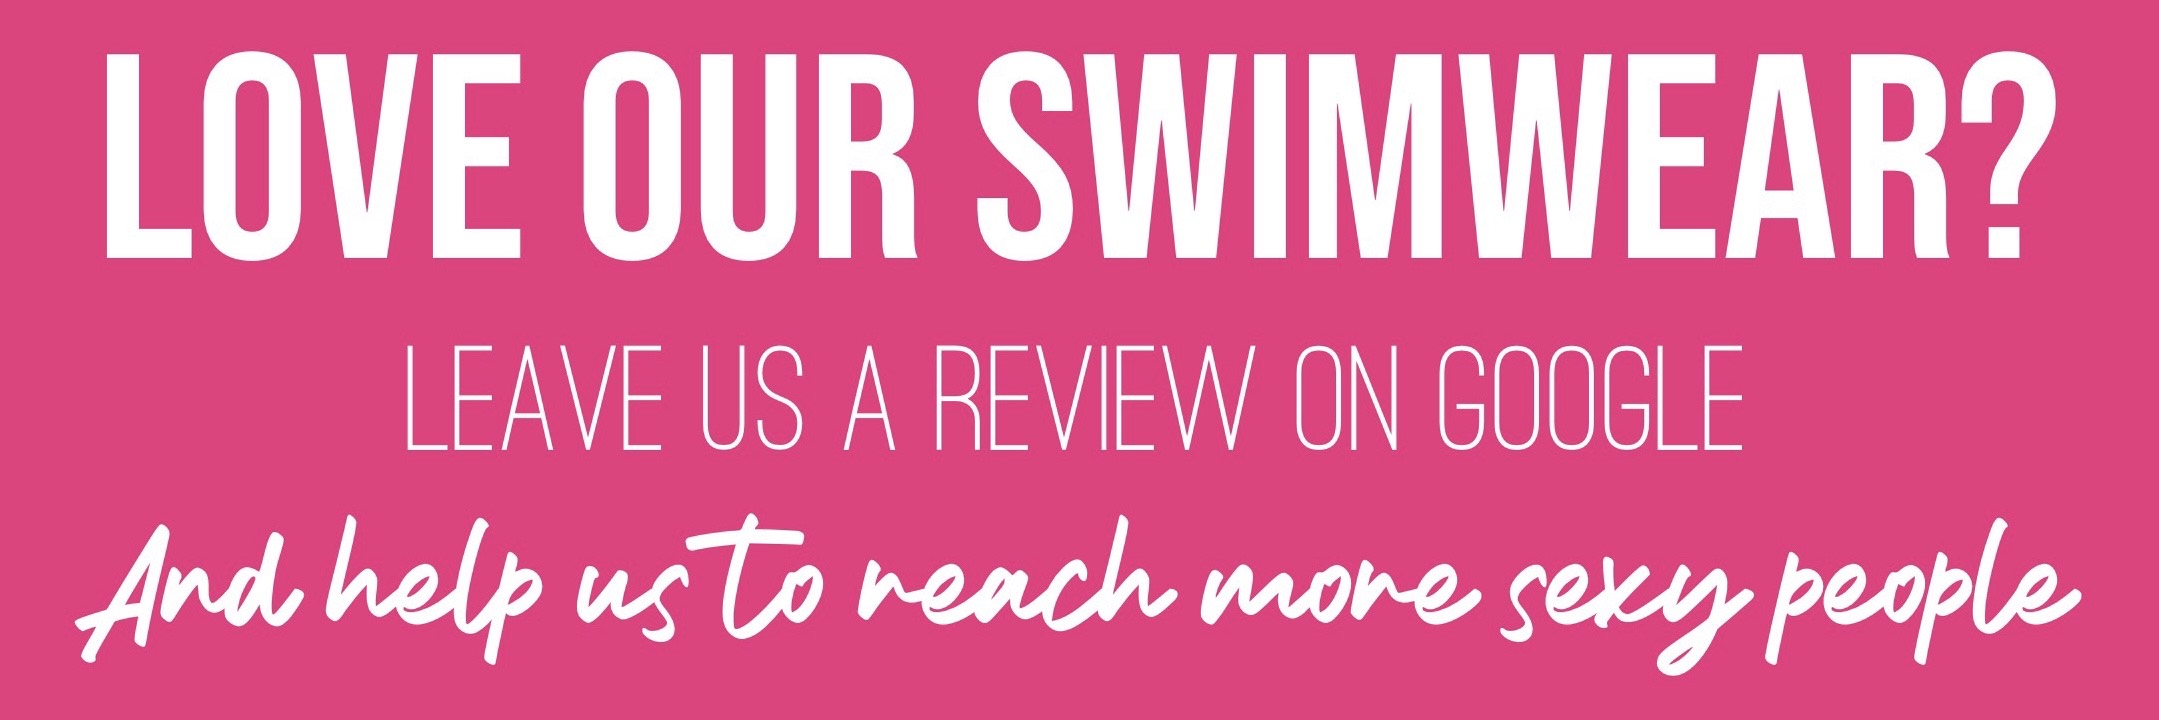 Love our Swimwear - Leave a good review